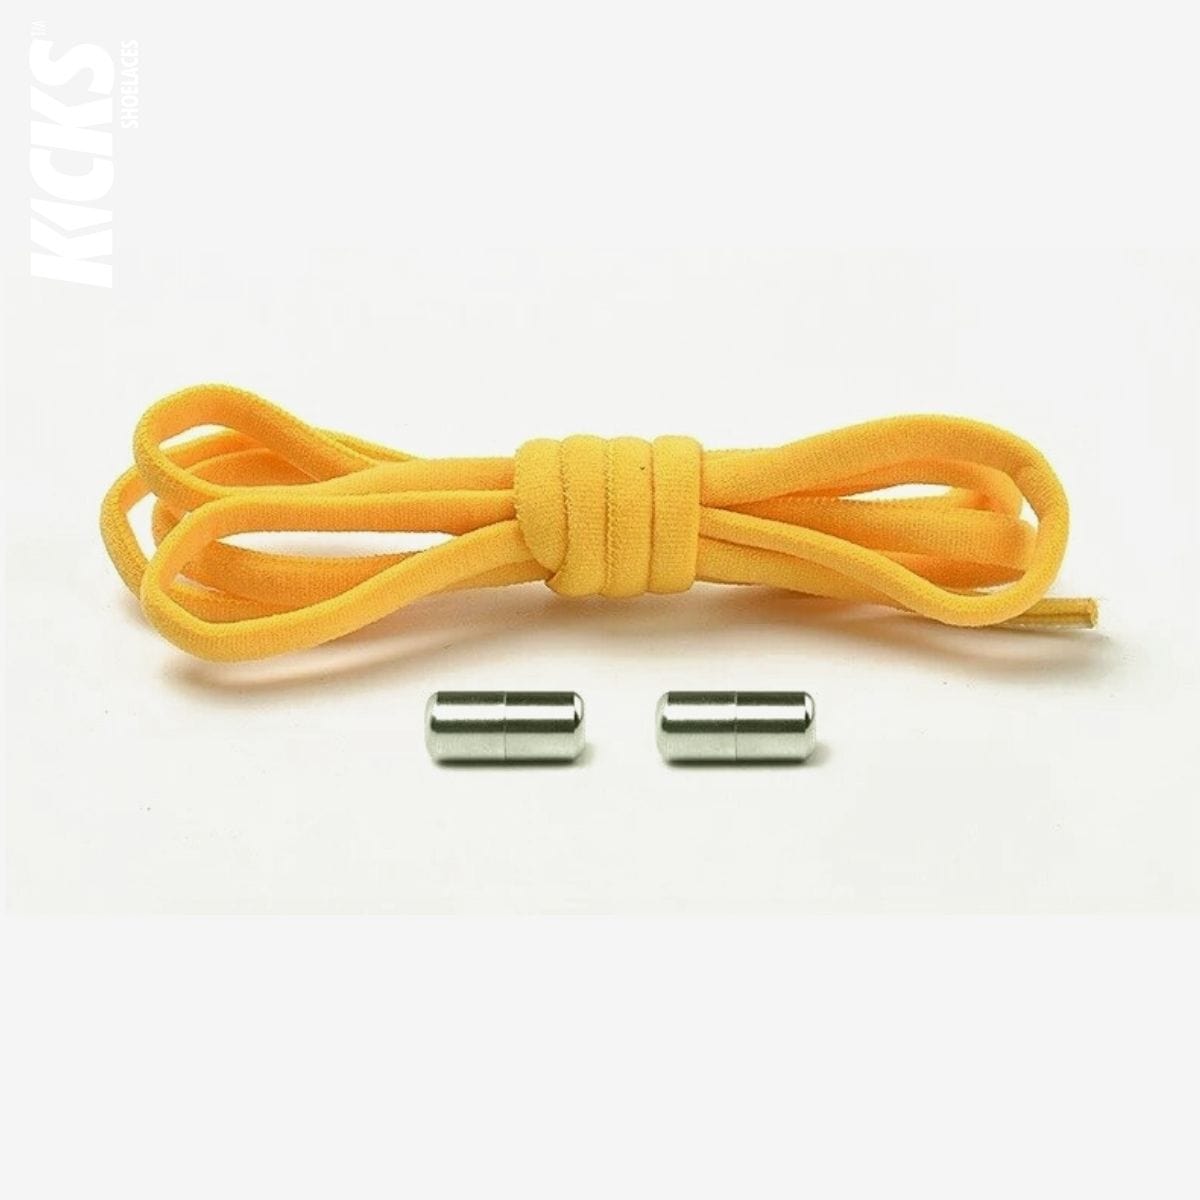 golden-yellow-kids-elastic-no-tie-shoe-laces-for-sneakers-by-kicks-shoelaces